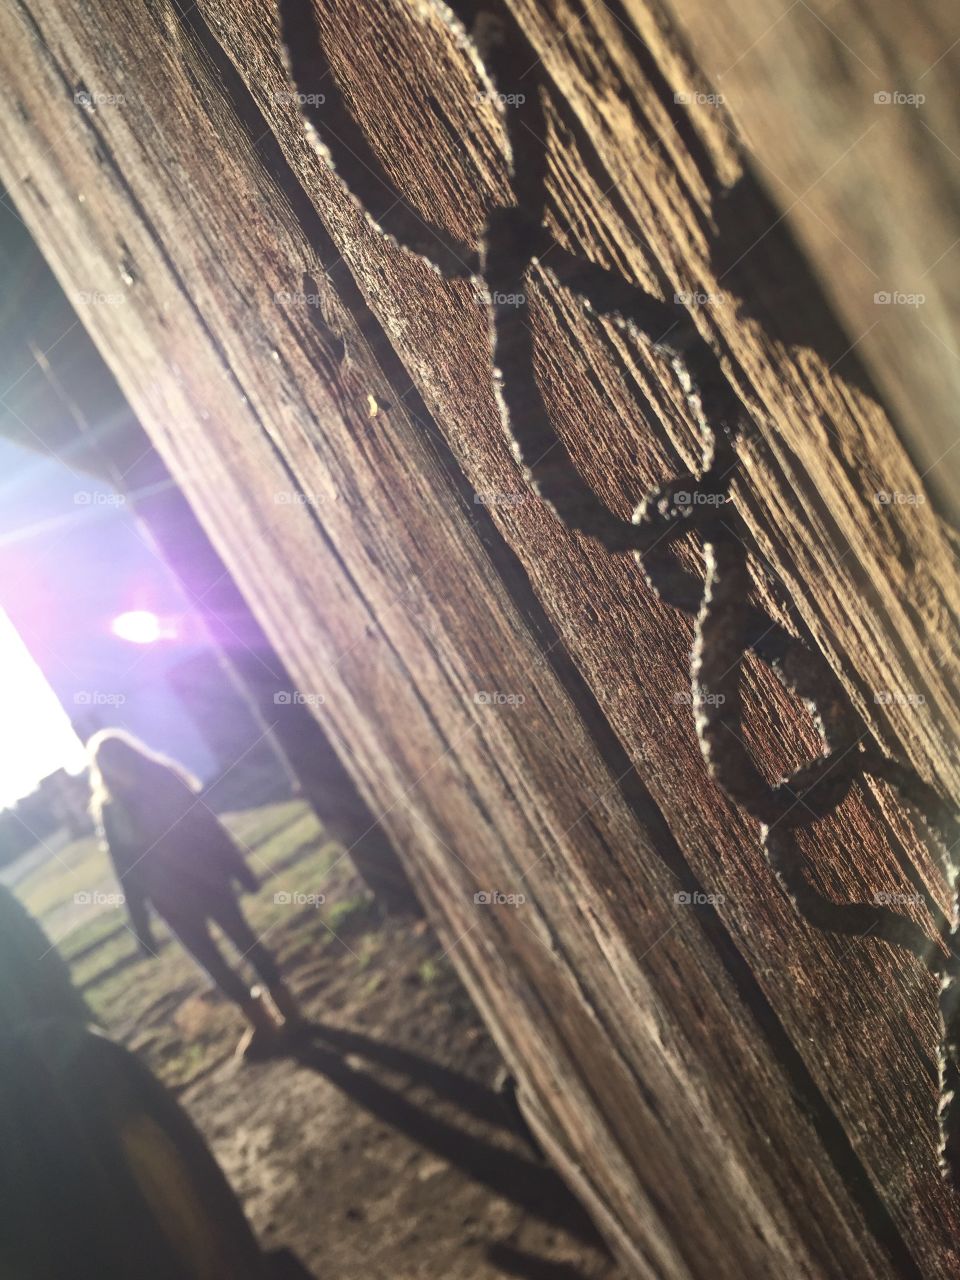 Found an old barn, with broken down doors and old rusty chains. Taken during a winter sunset.